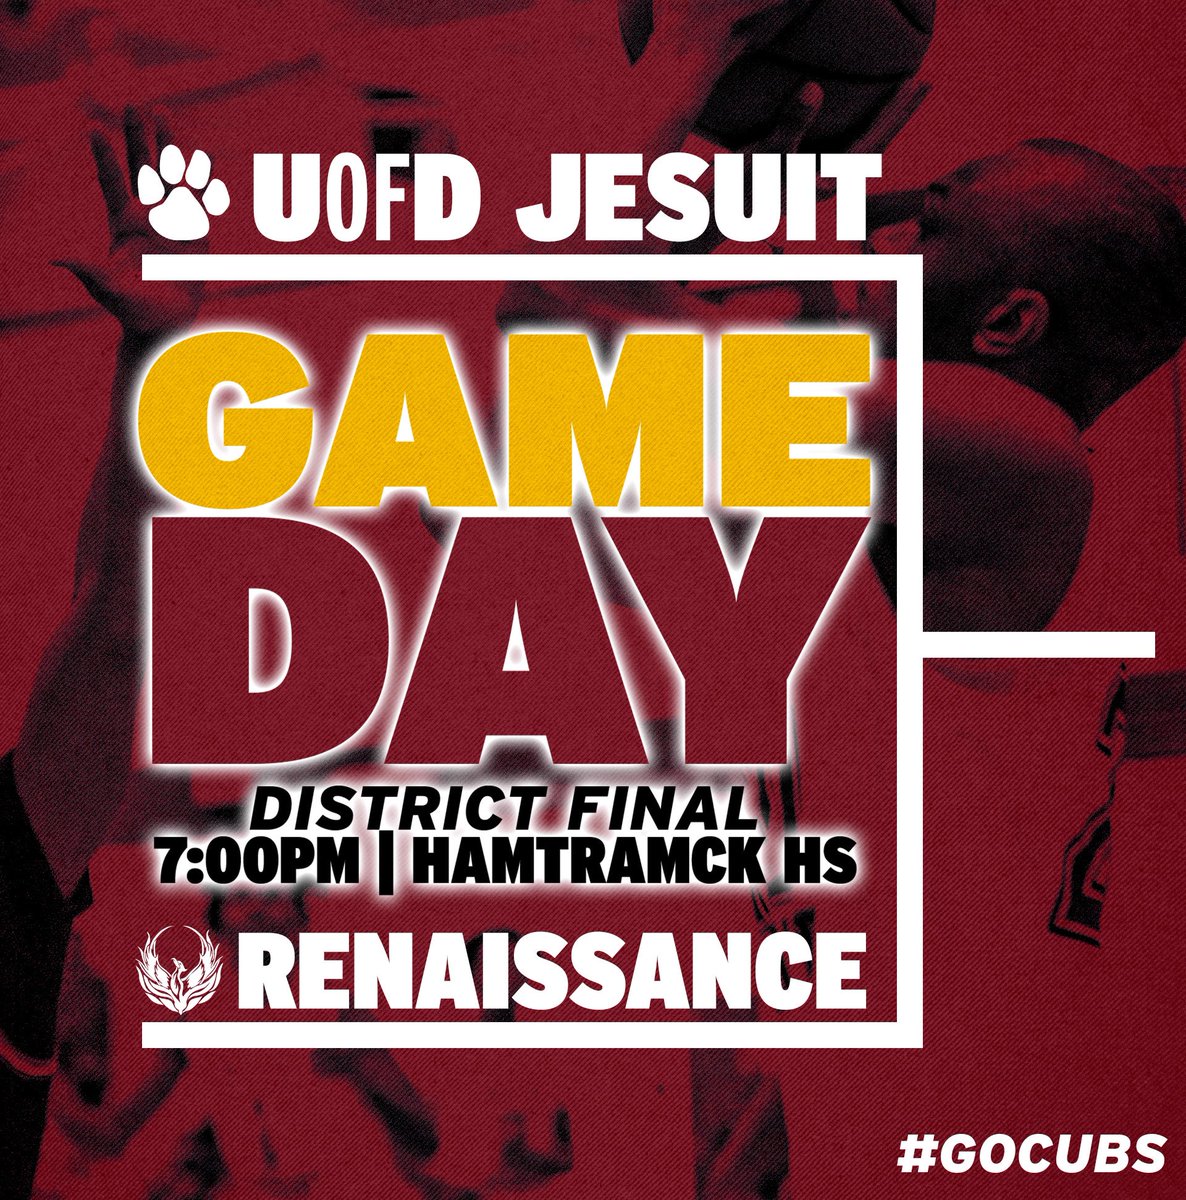 It’s championship Friday! Tonight we take on Renaissance in the District Final! The game tips off at 7:00 PM at Hamtramck. #GoCubs